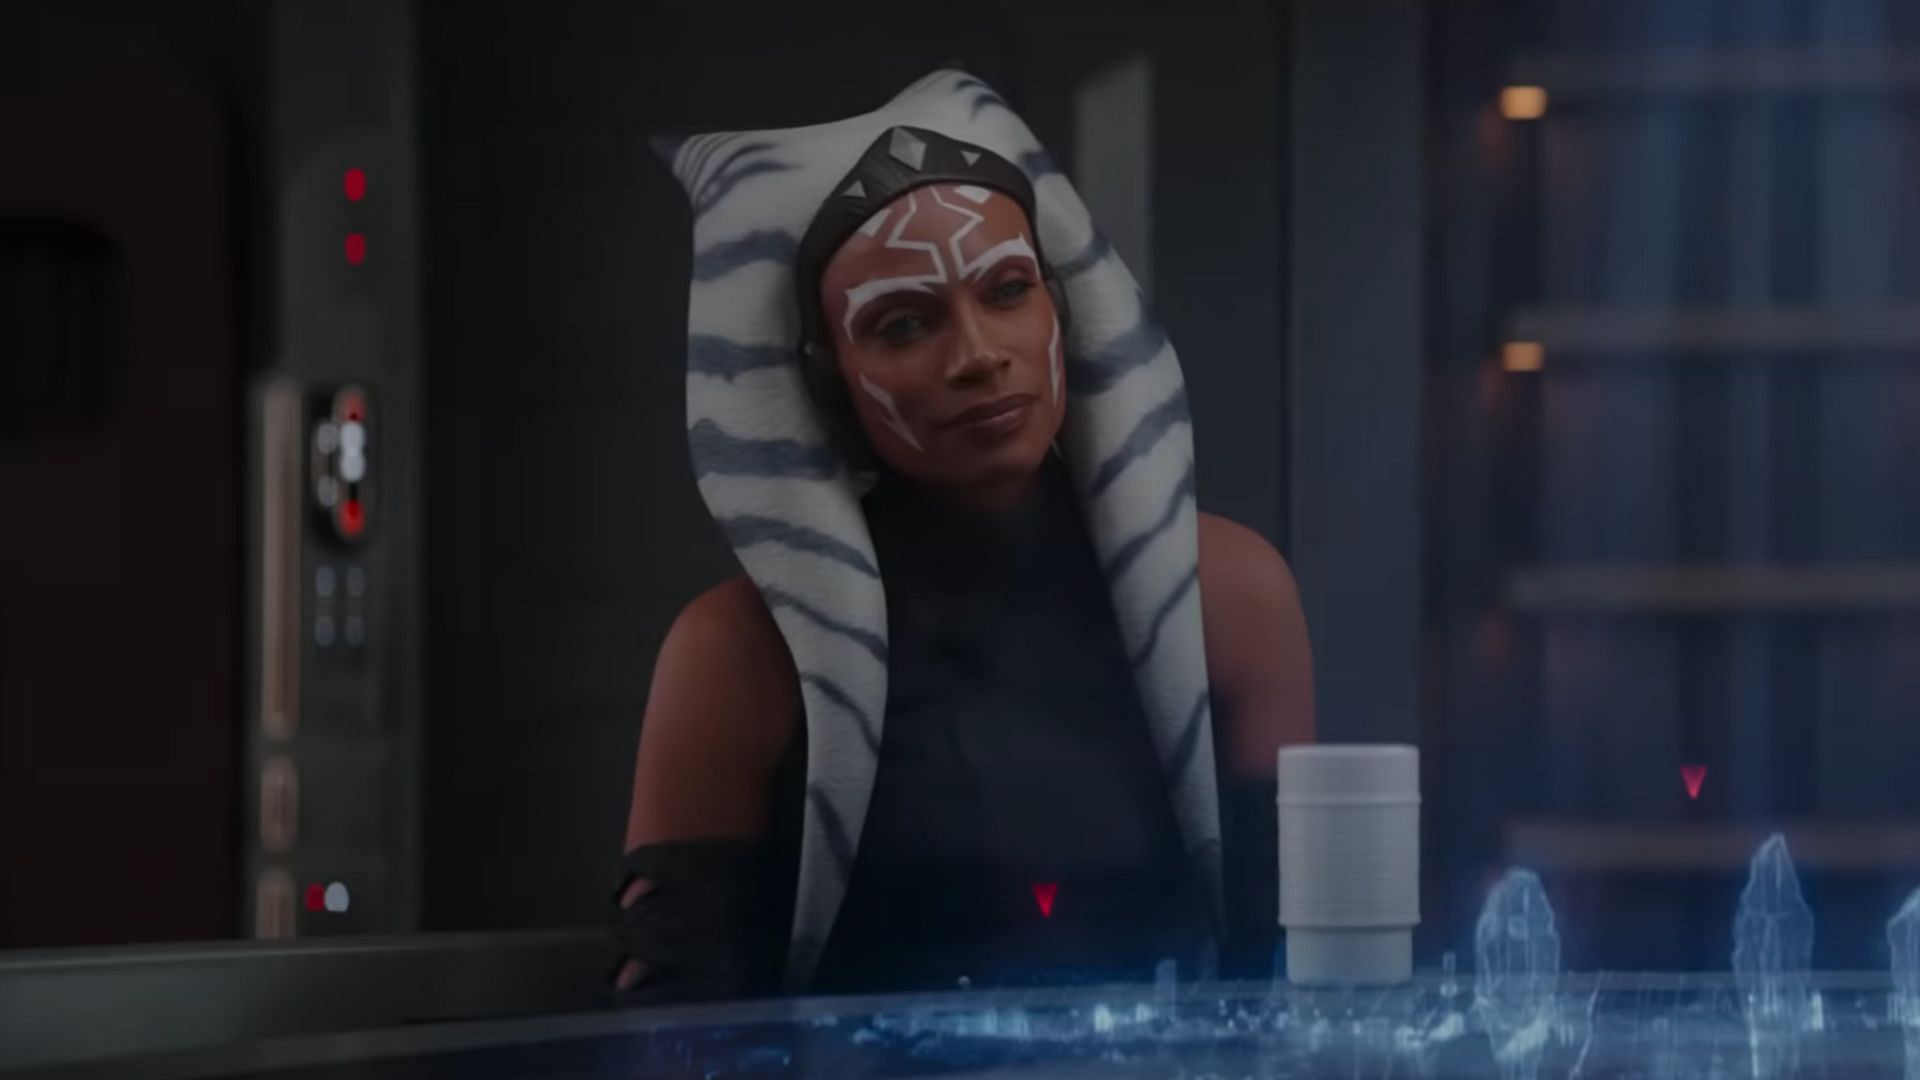 Ahsoka episode 4 will see more action and challenges (Image via Star Wars)